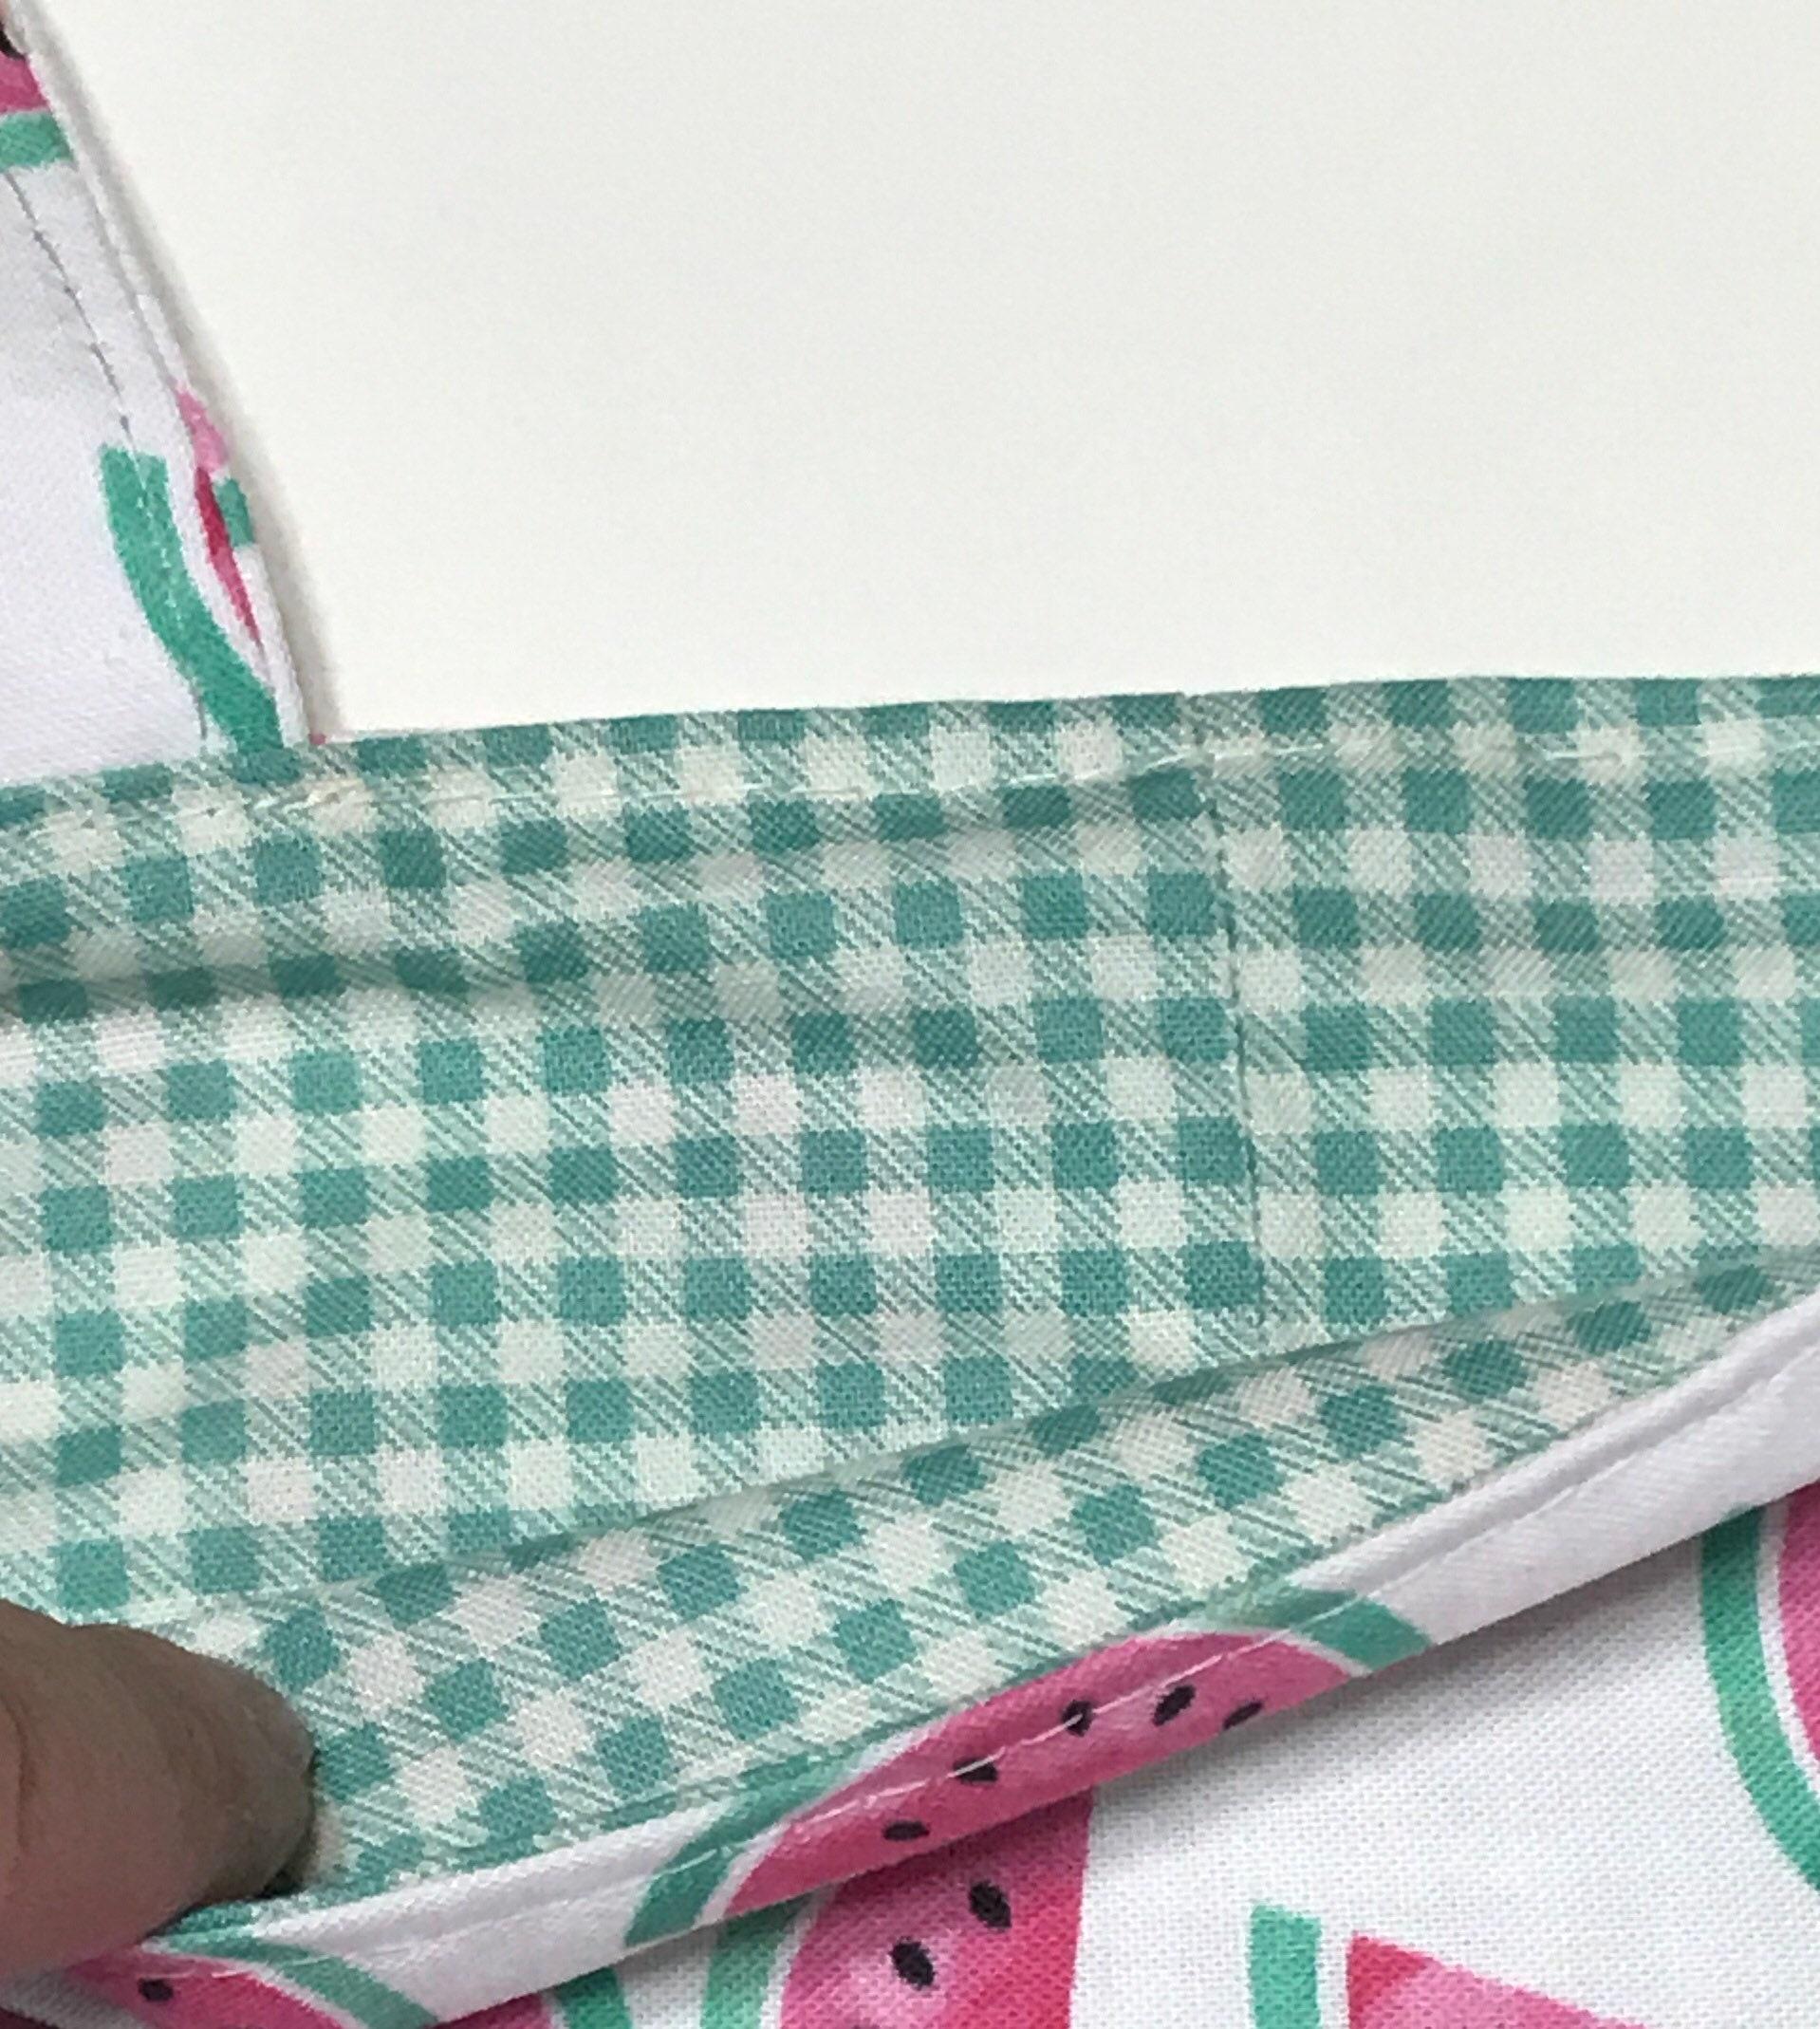 Lining is green gingham check